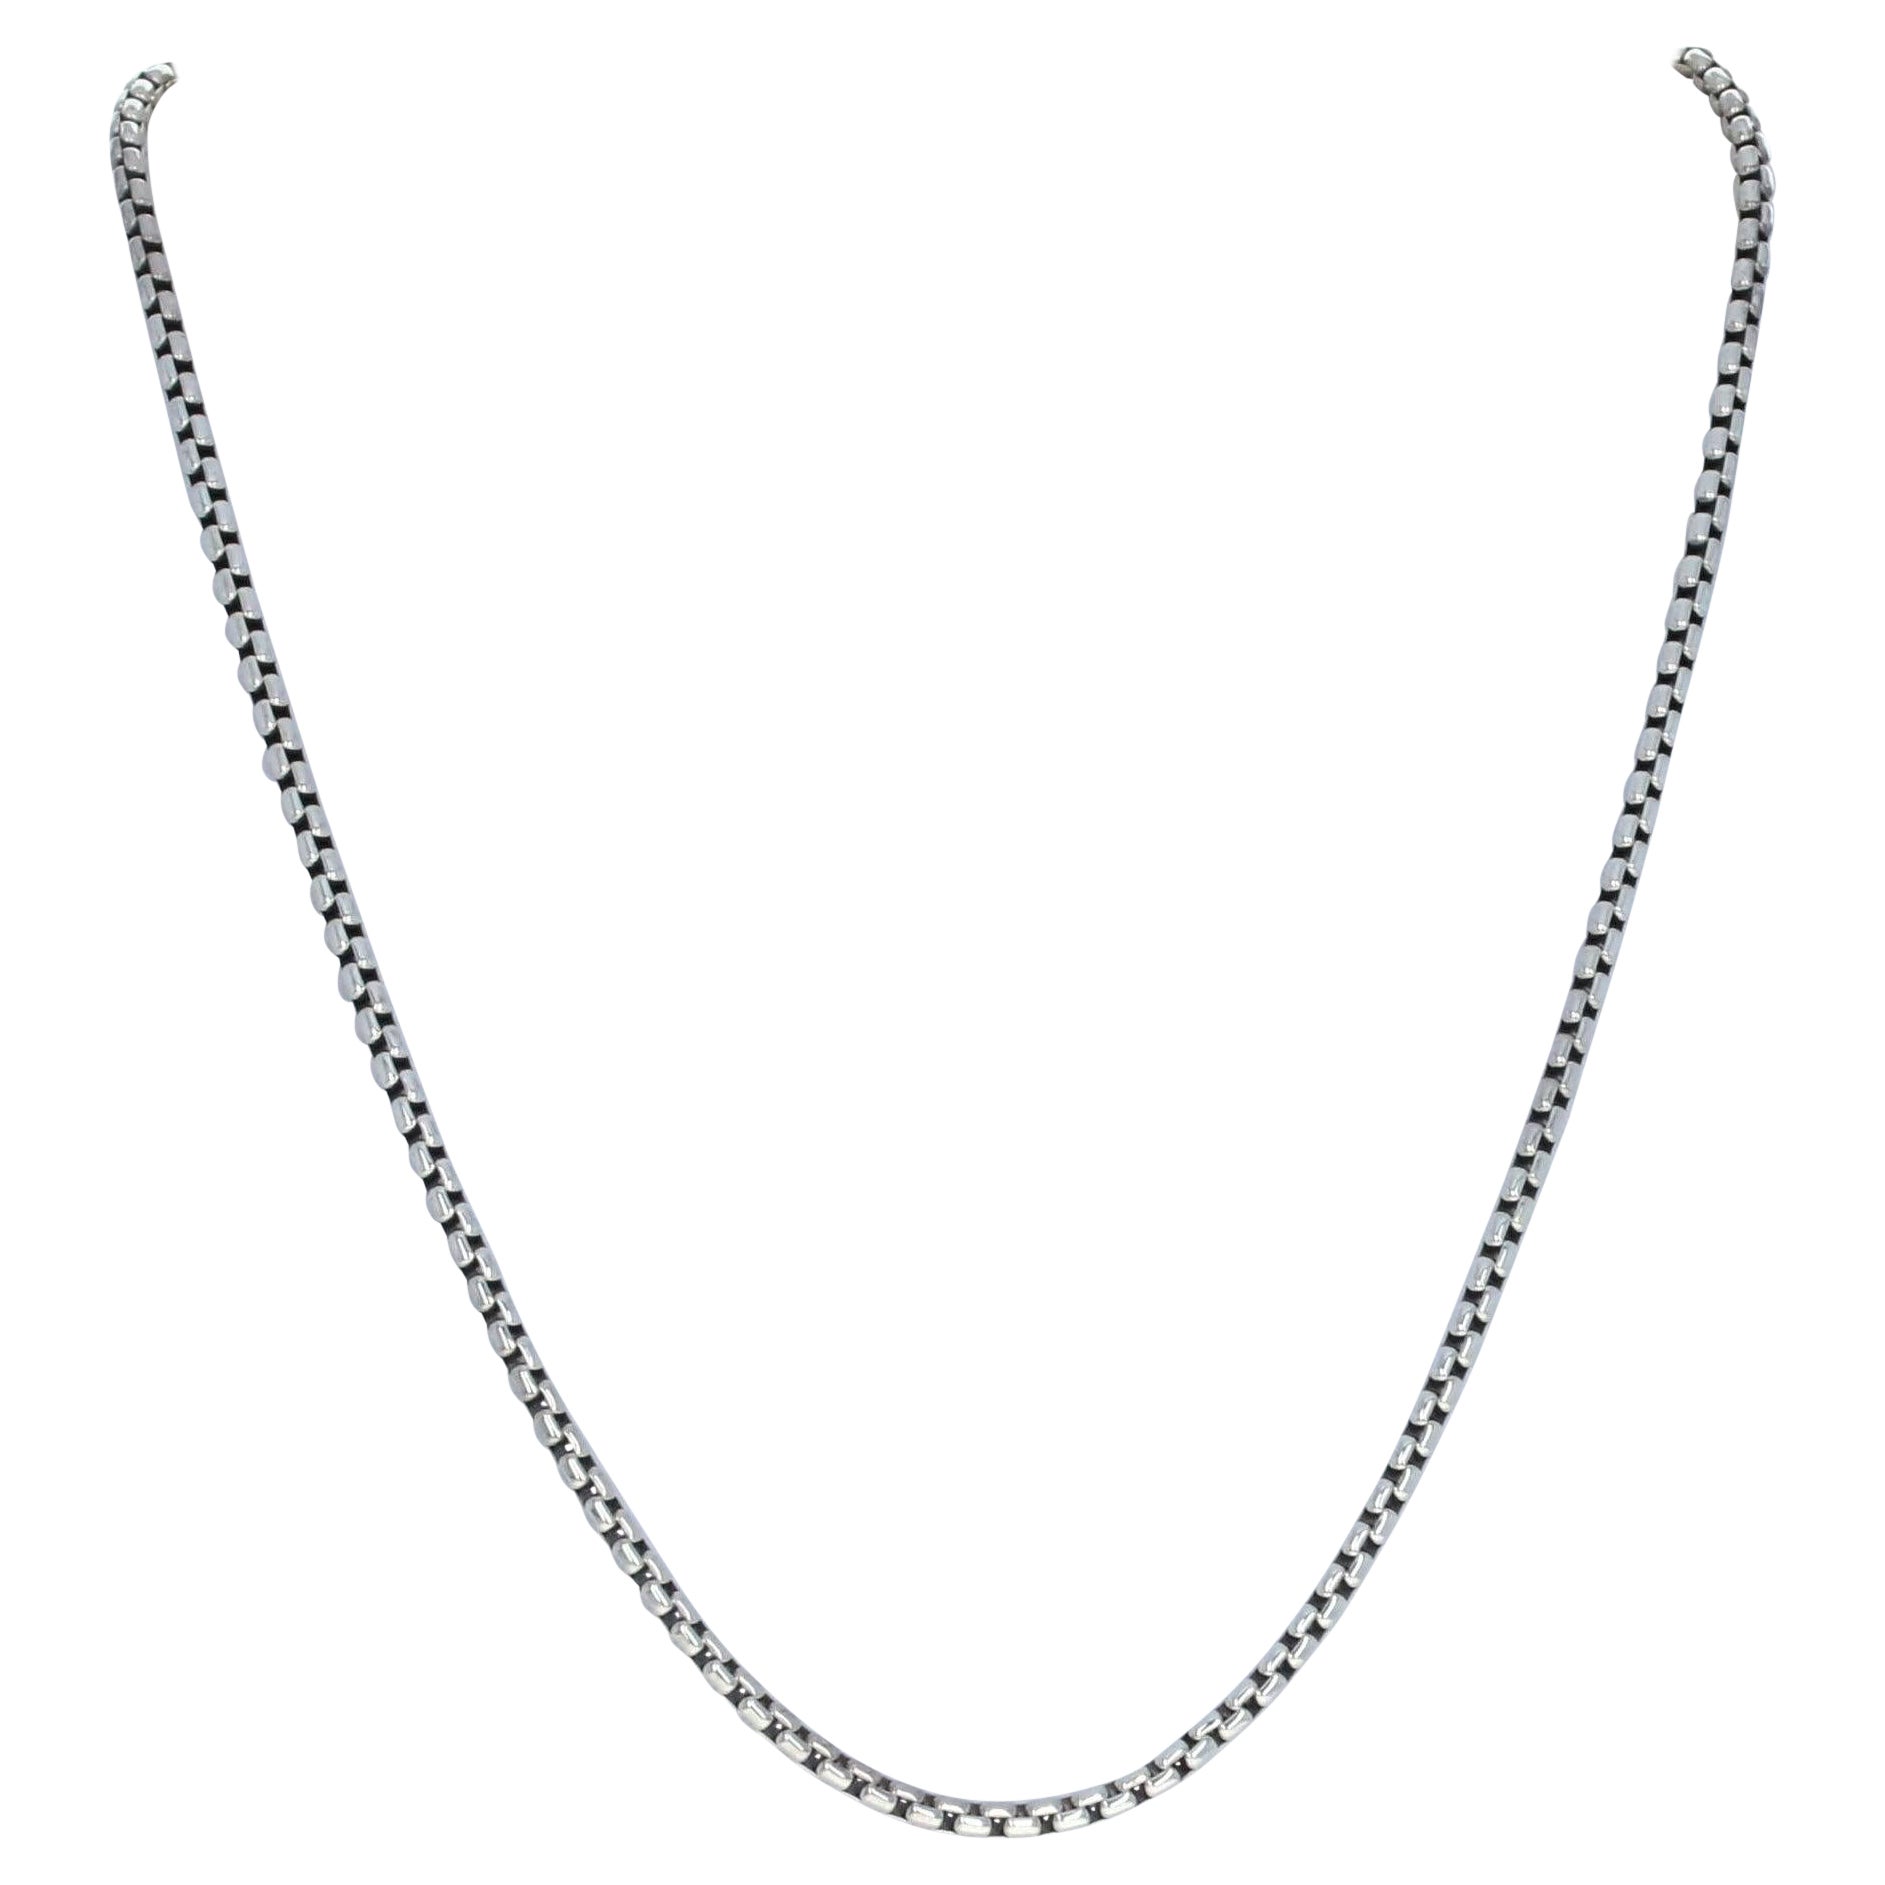 Chamilia Necklace 1210-0008 Box Chain Snap Oxidized Sterling Silver For Sale